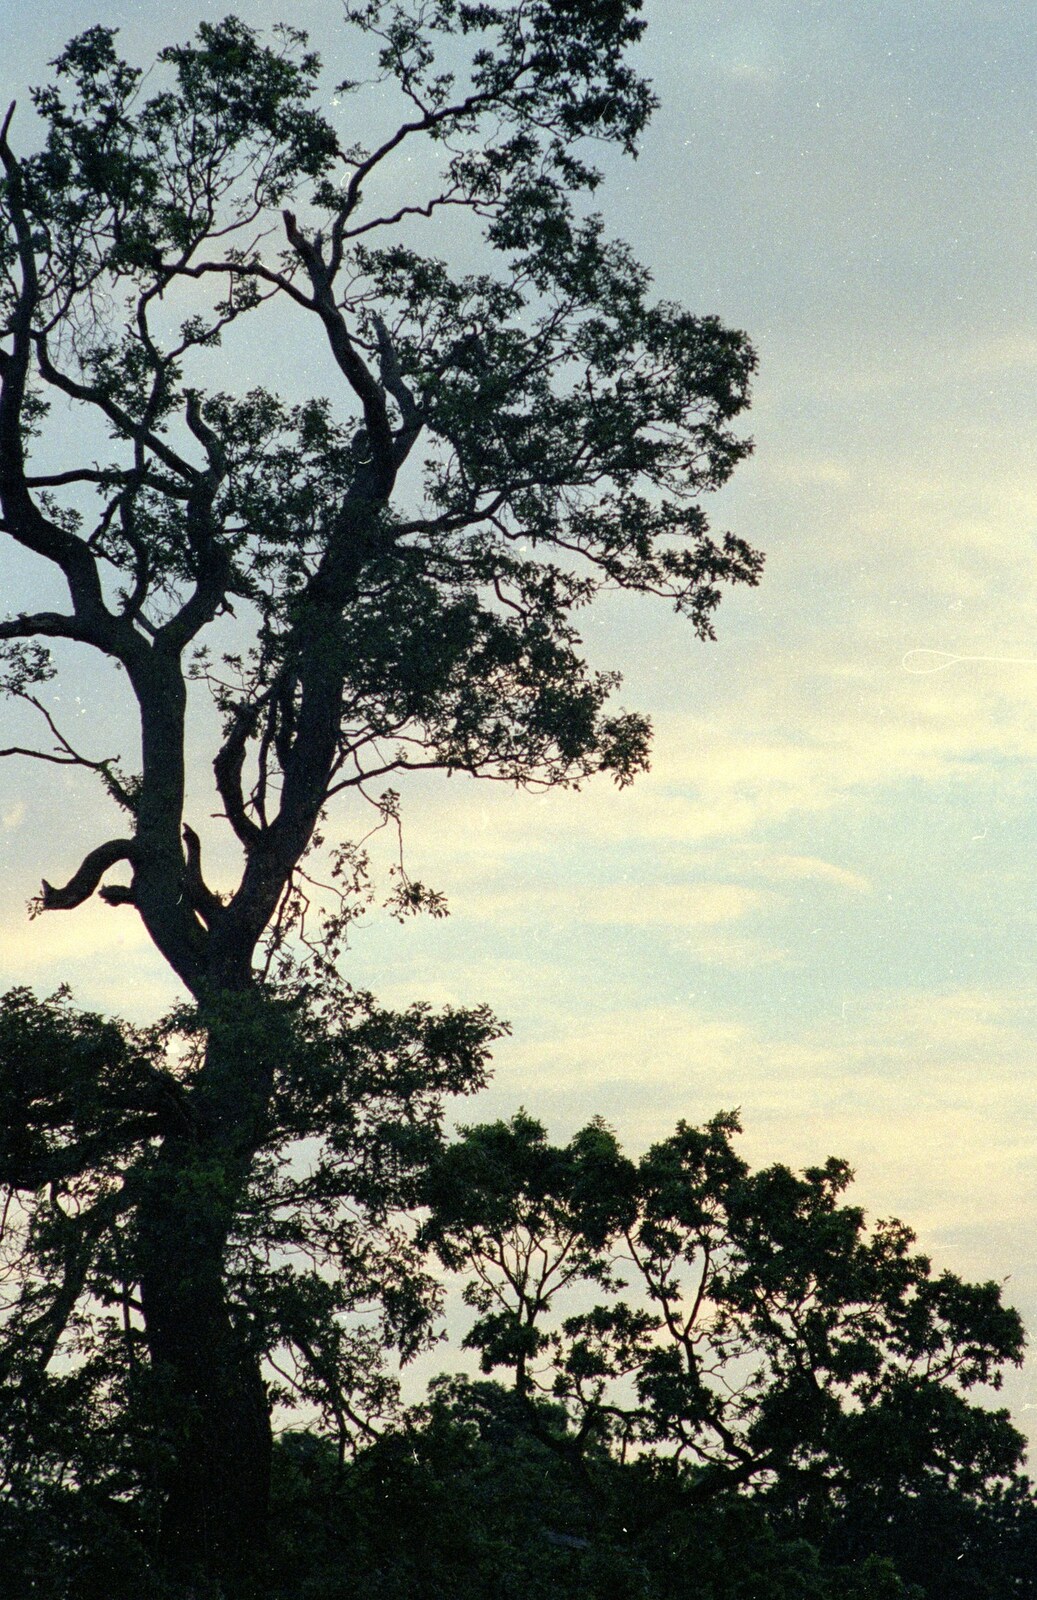 An evening tree from A Trip to the Beach, East Runton, Norfolk - 6th July 1988